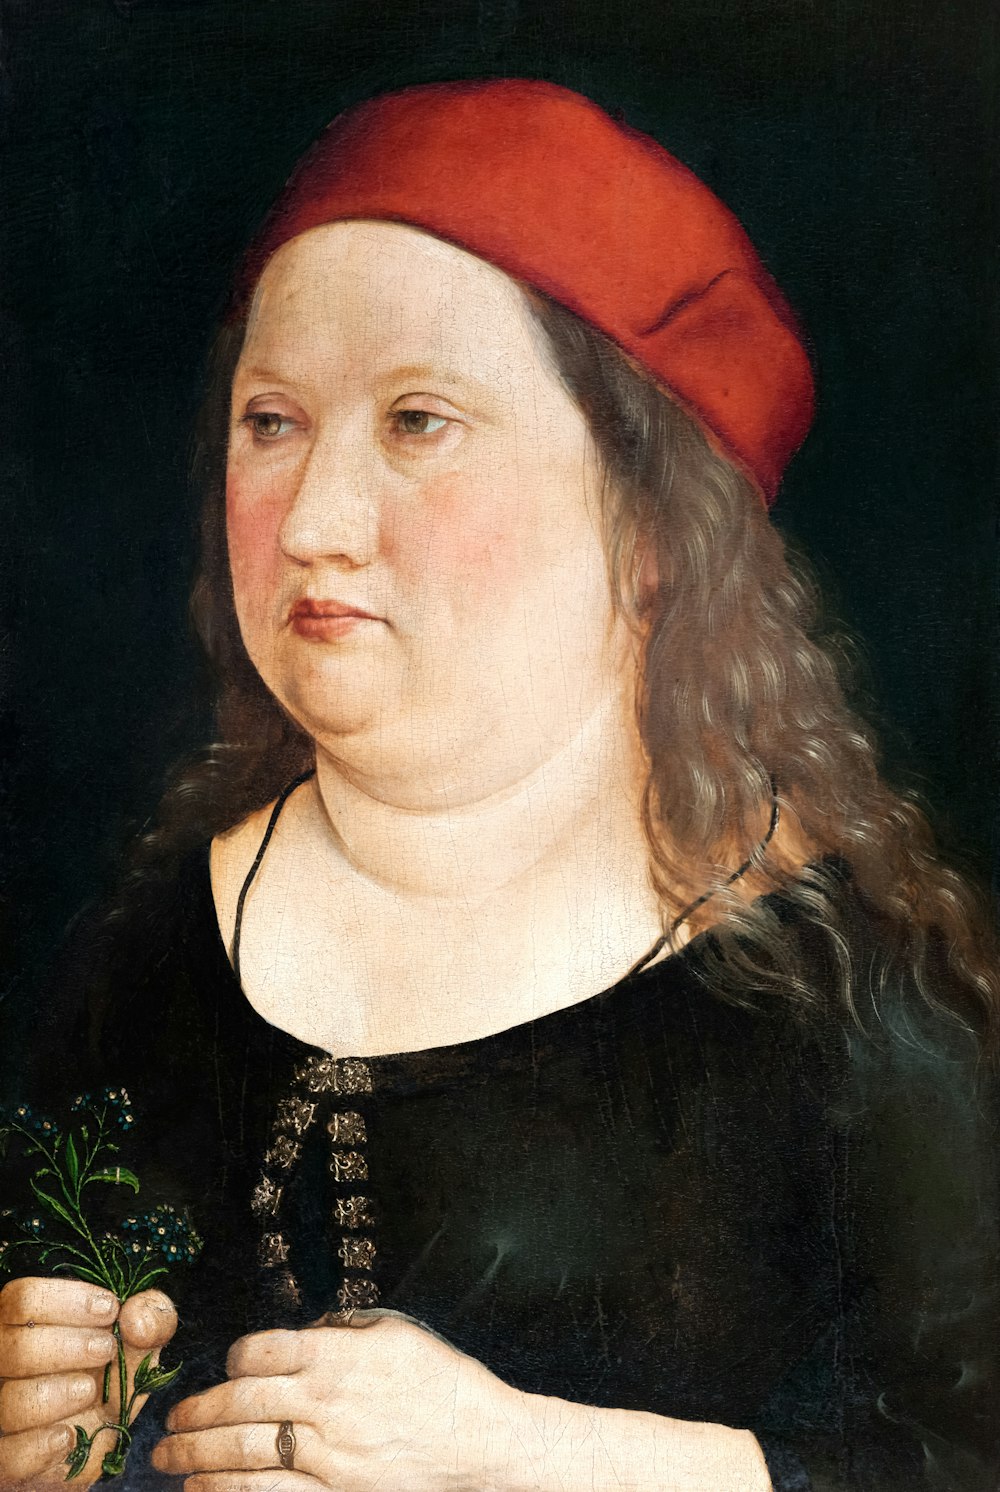 a painting of a woman wearing a red hat